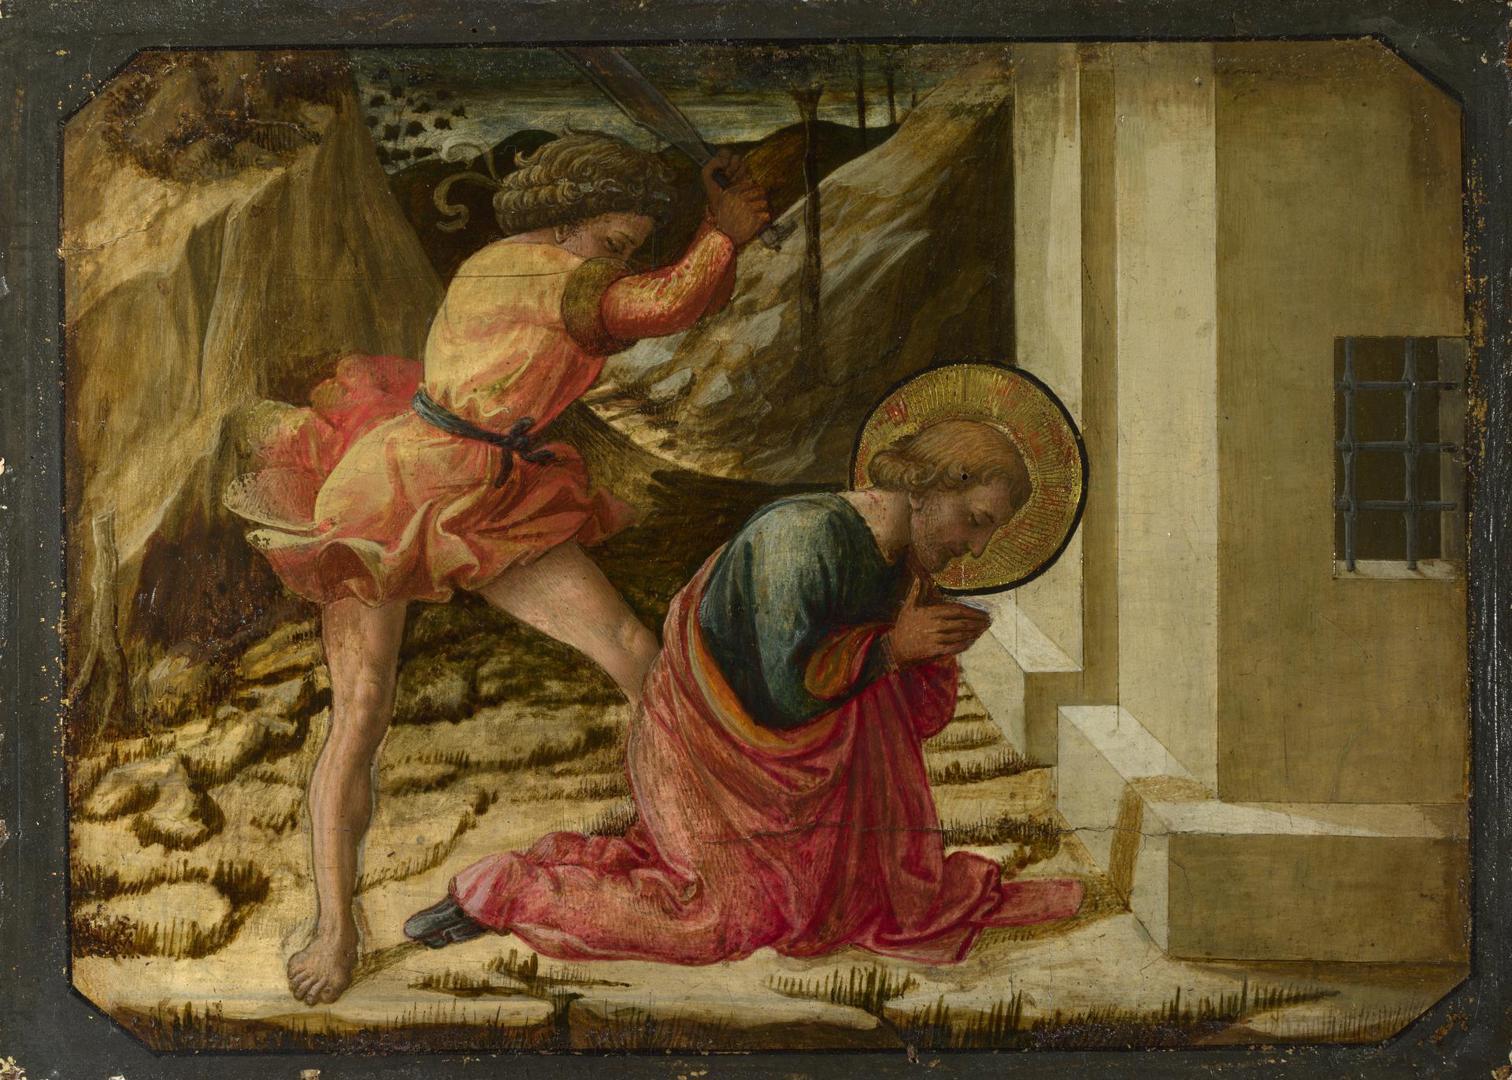 Beheading of Saint James the Great: Predella Panel by Fra Filippo Lippi and workshop